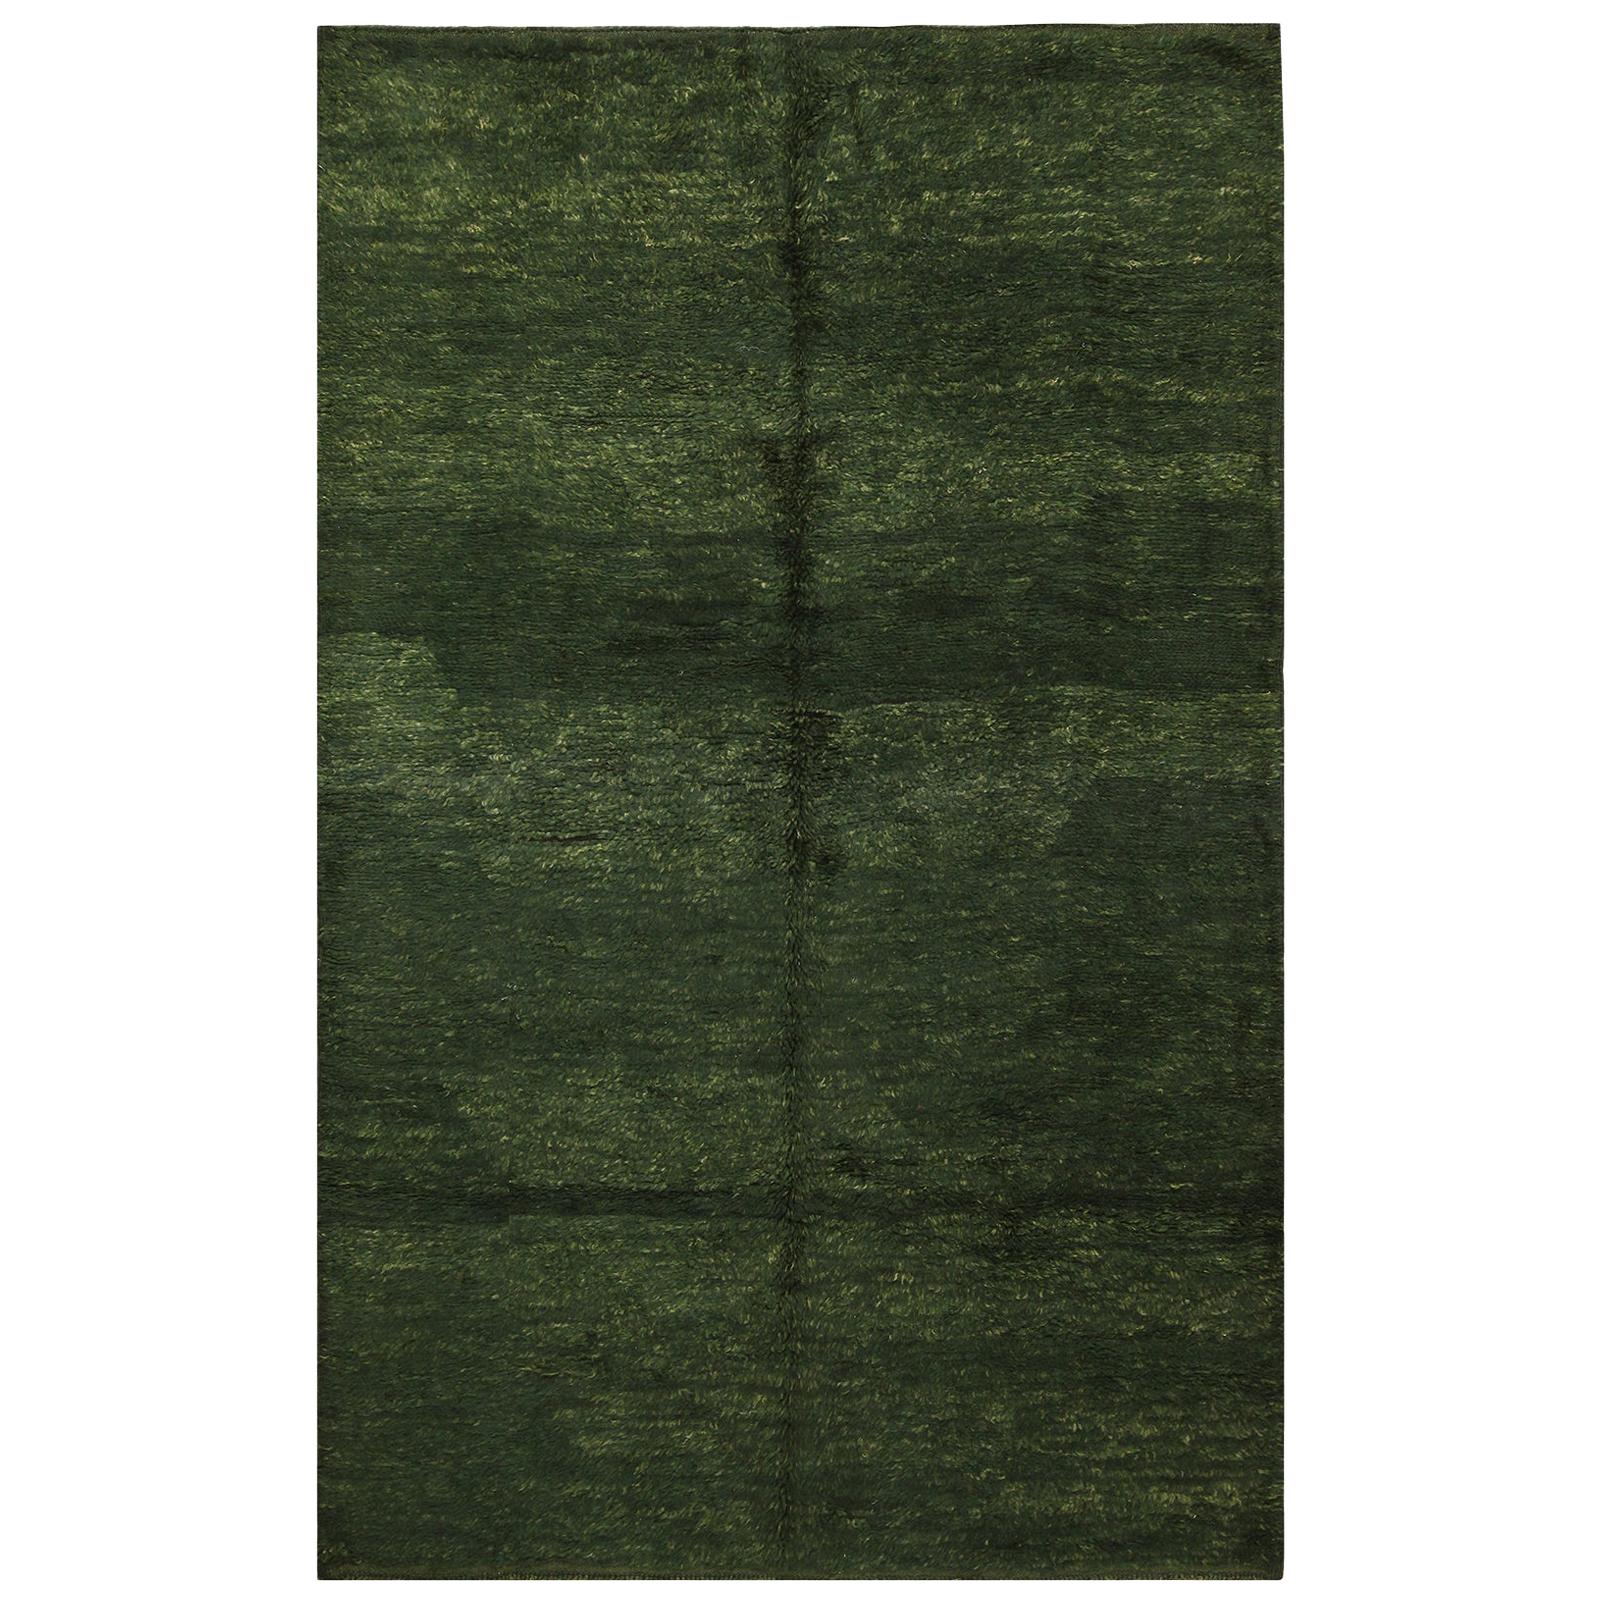 Moroccan Emerald Green Rug. Size: 6 ft 2 in x 9 ft 8 in